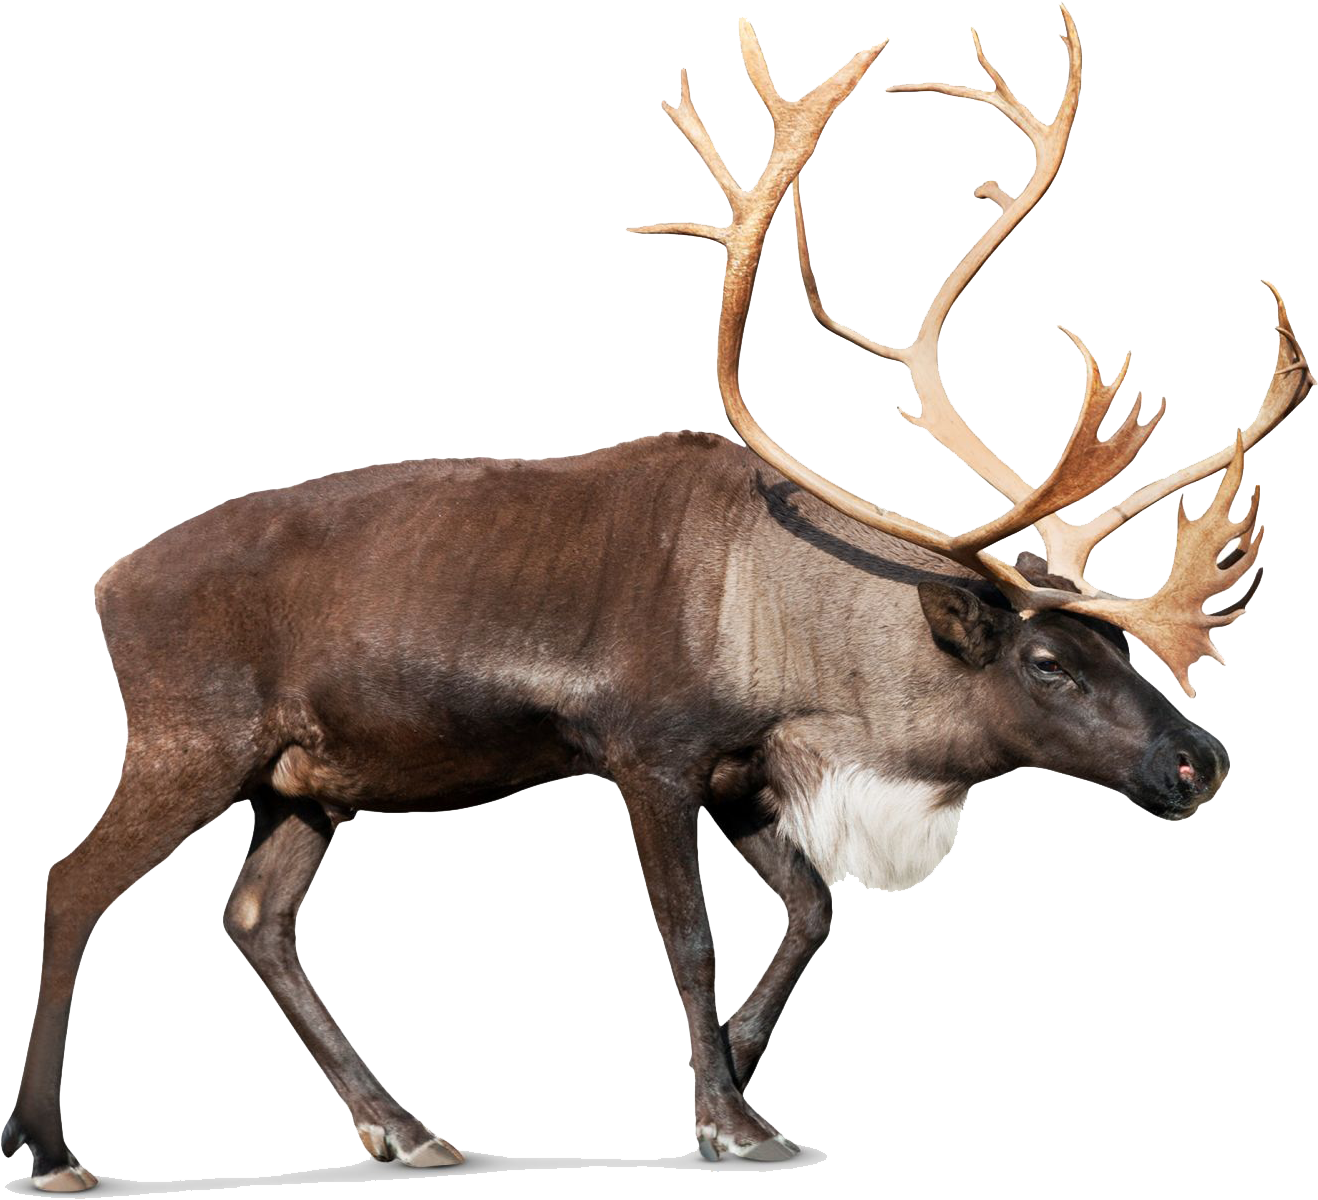 Download Free Photo Report - Caribou Reindeer (1440x1290)